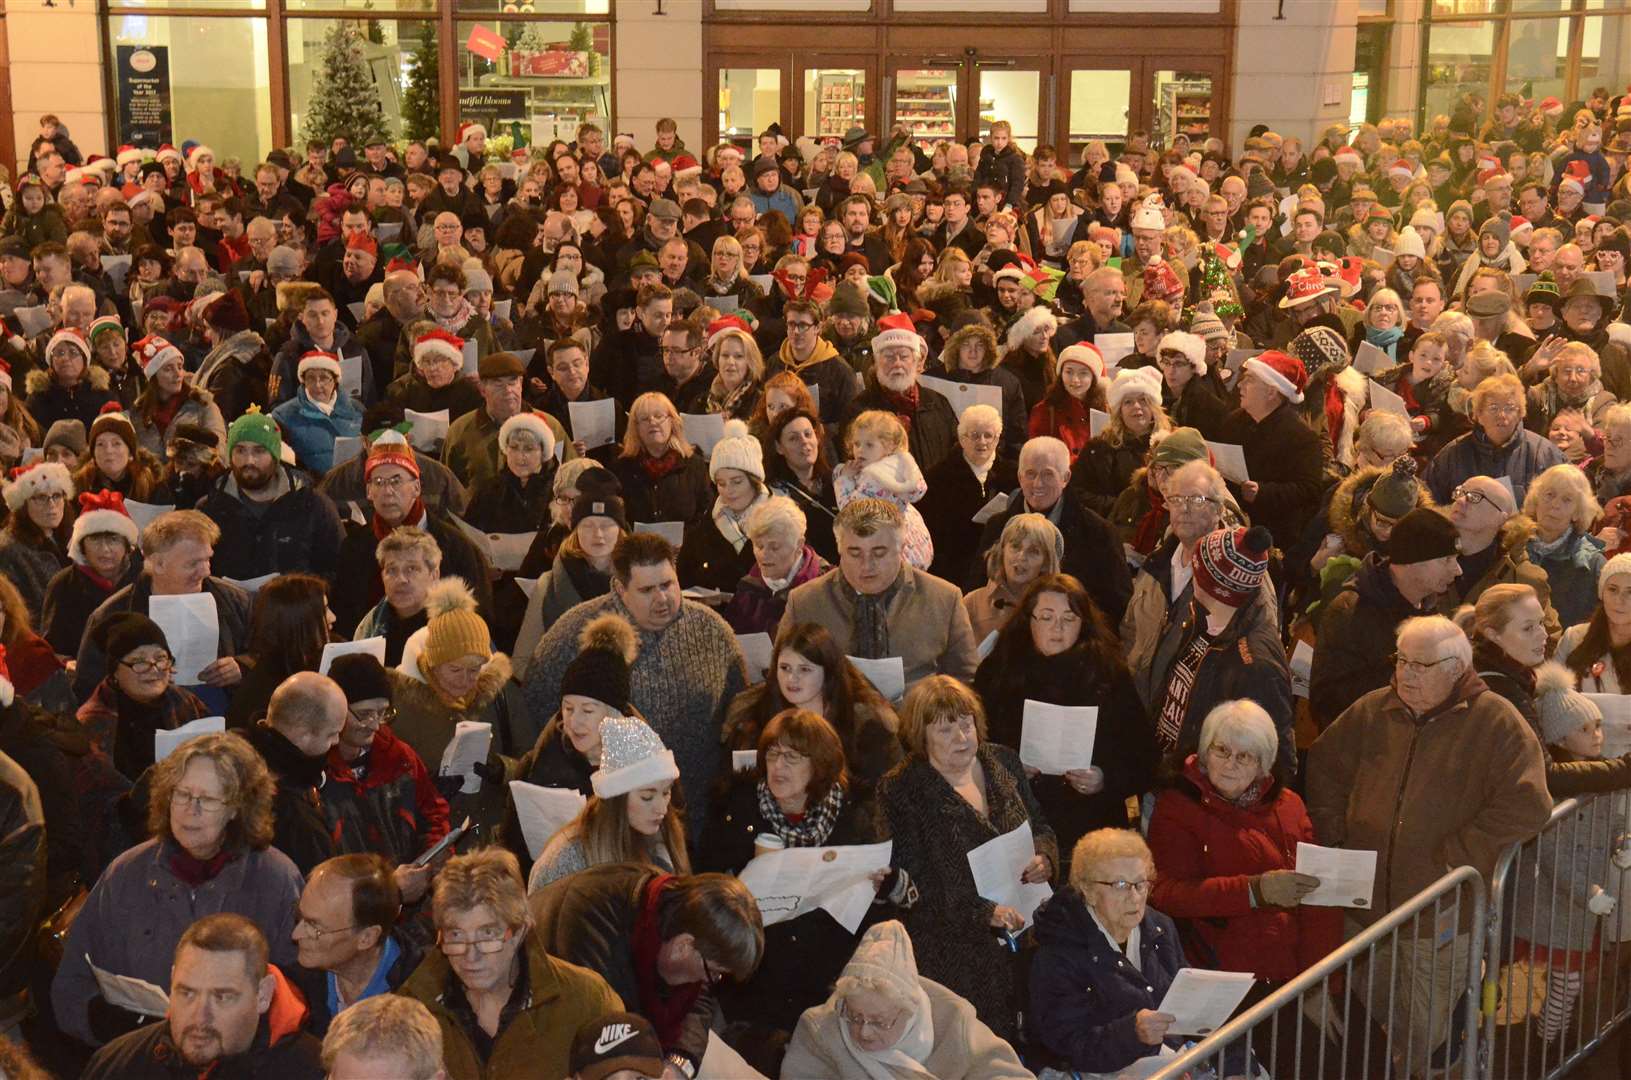 The Christmas Eve community carol singing usually attracts a big crowd